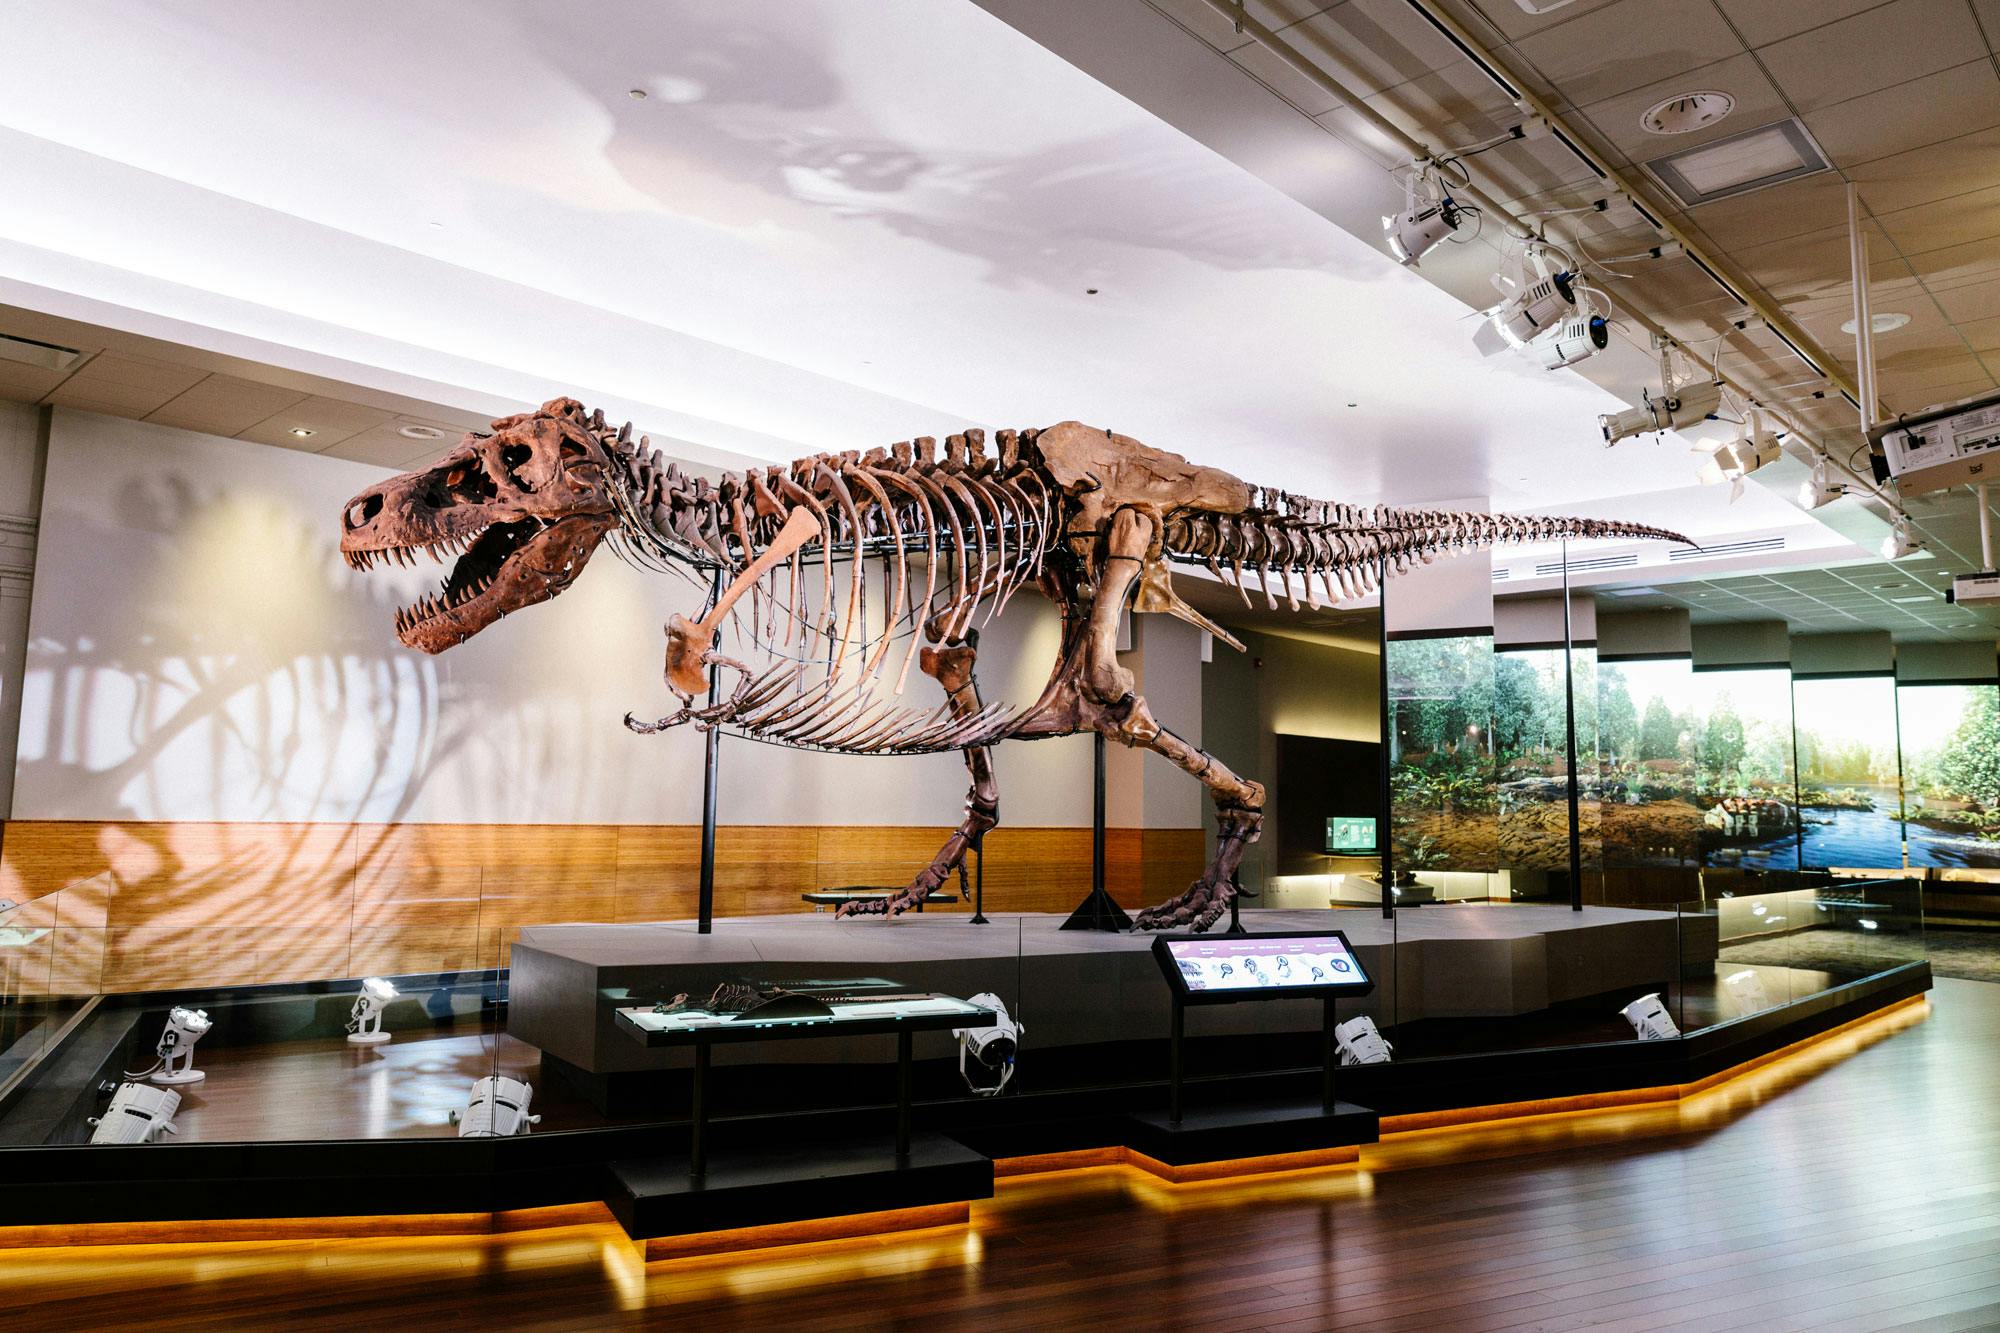 SUE the T. rex dinosaur skeleton on display in a museum gallery. Screens behind the dinosaur show a forest scene.